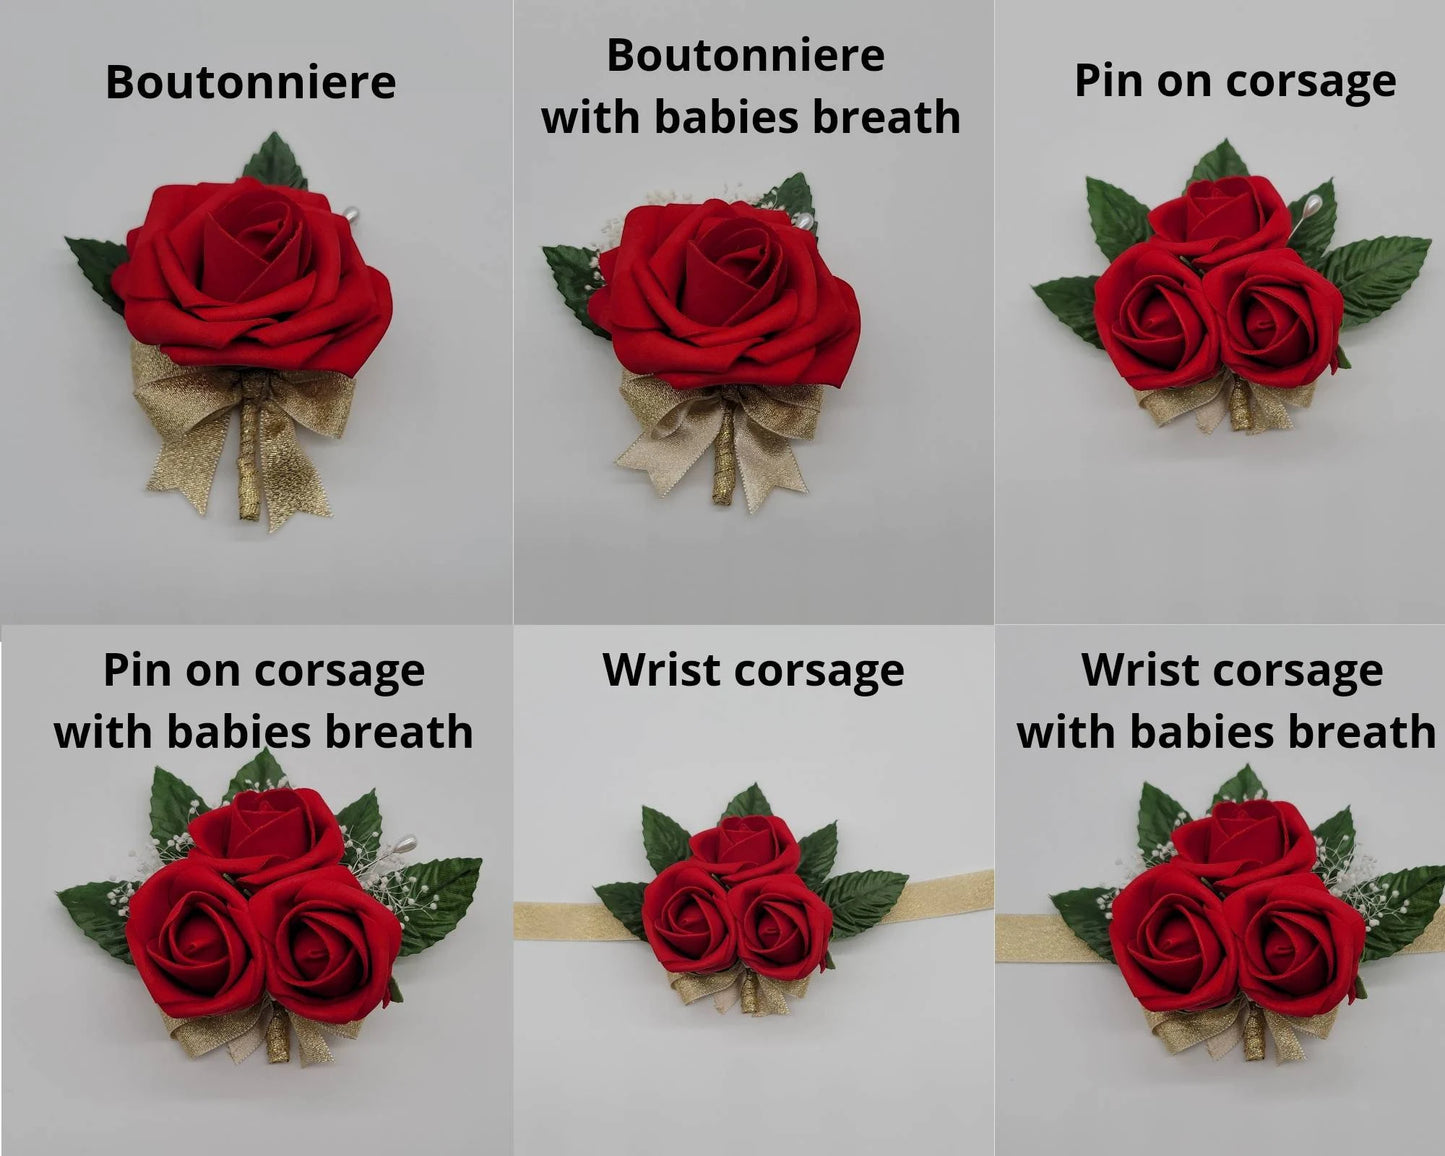 Burgundy, Dusty Rose, and Cream Corsages and Boutonnieres